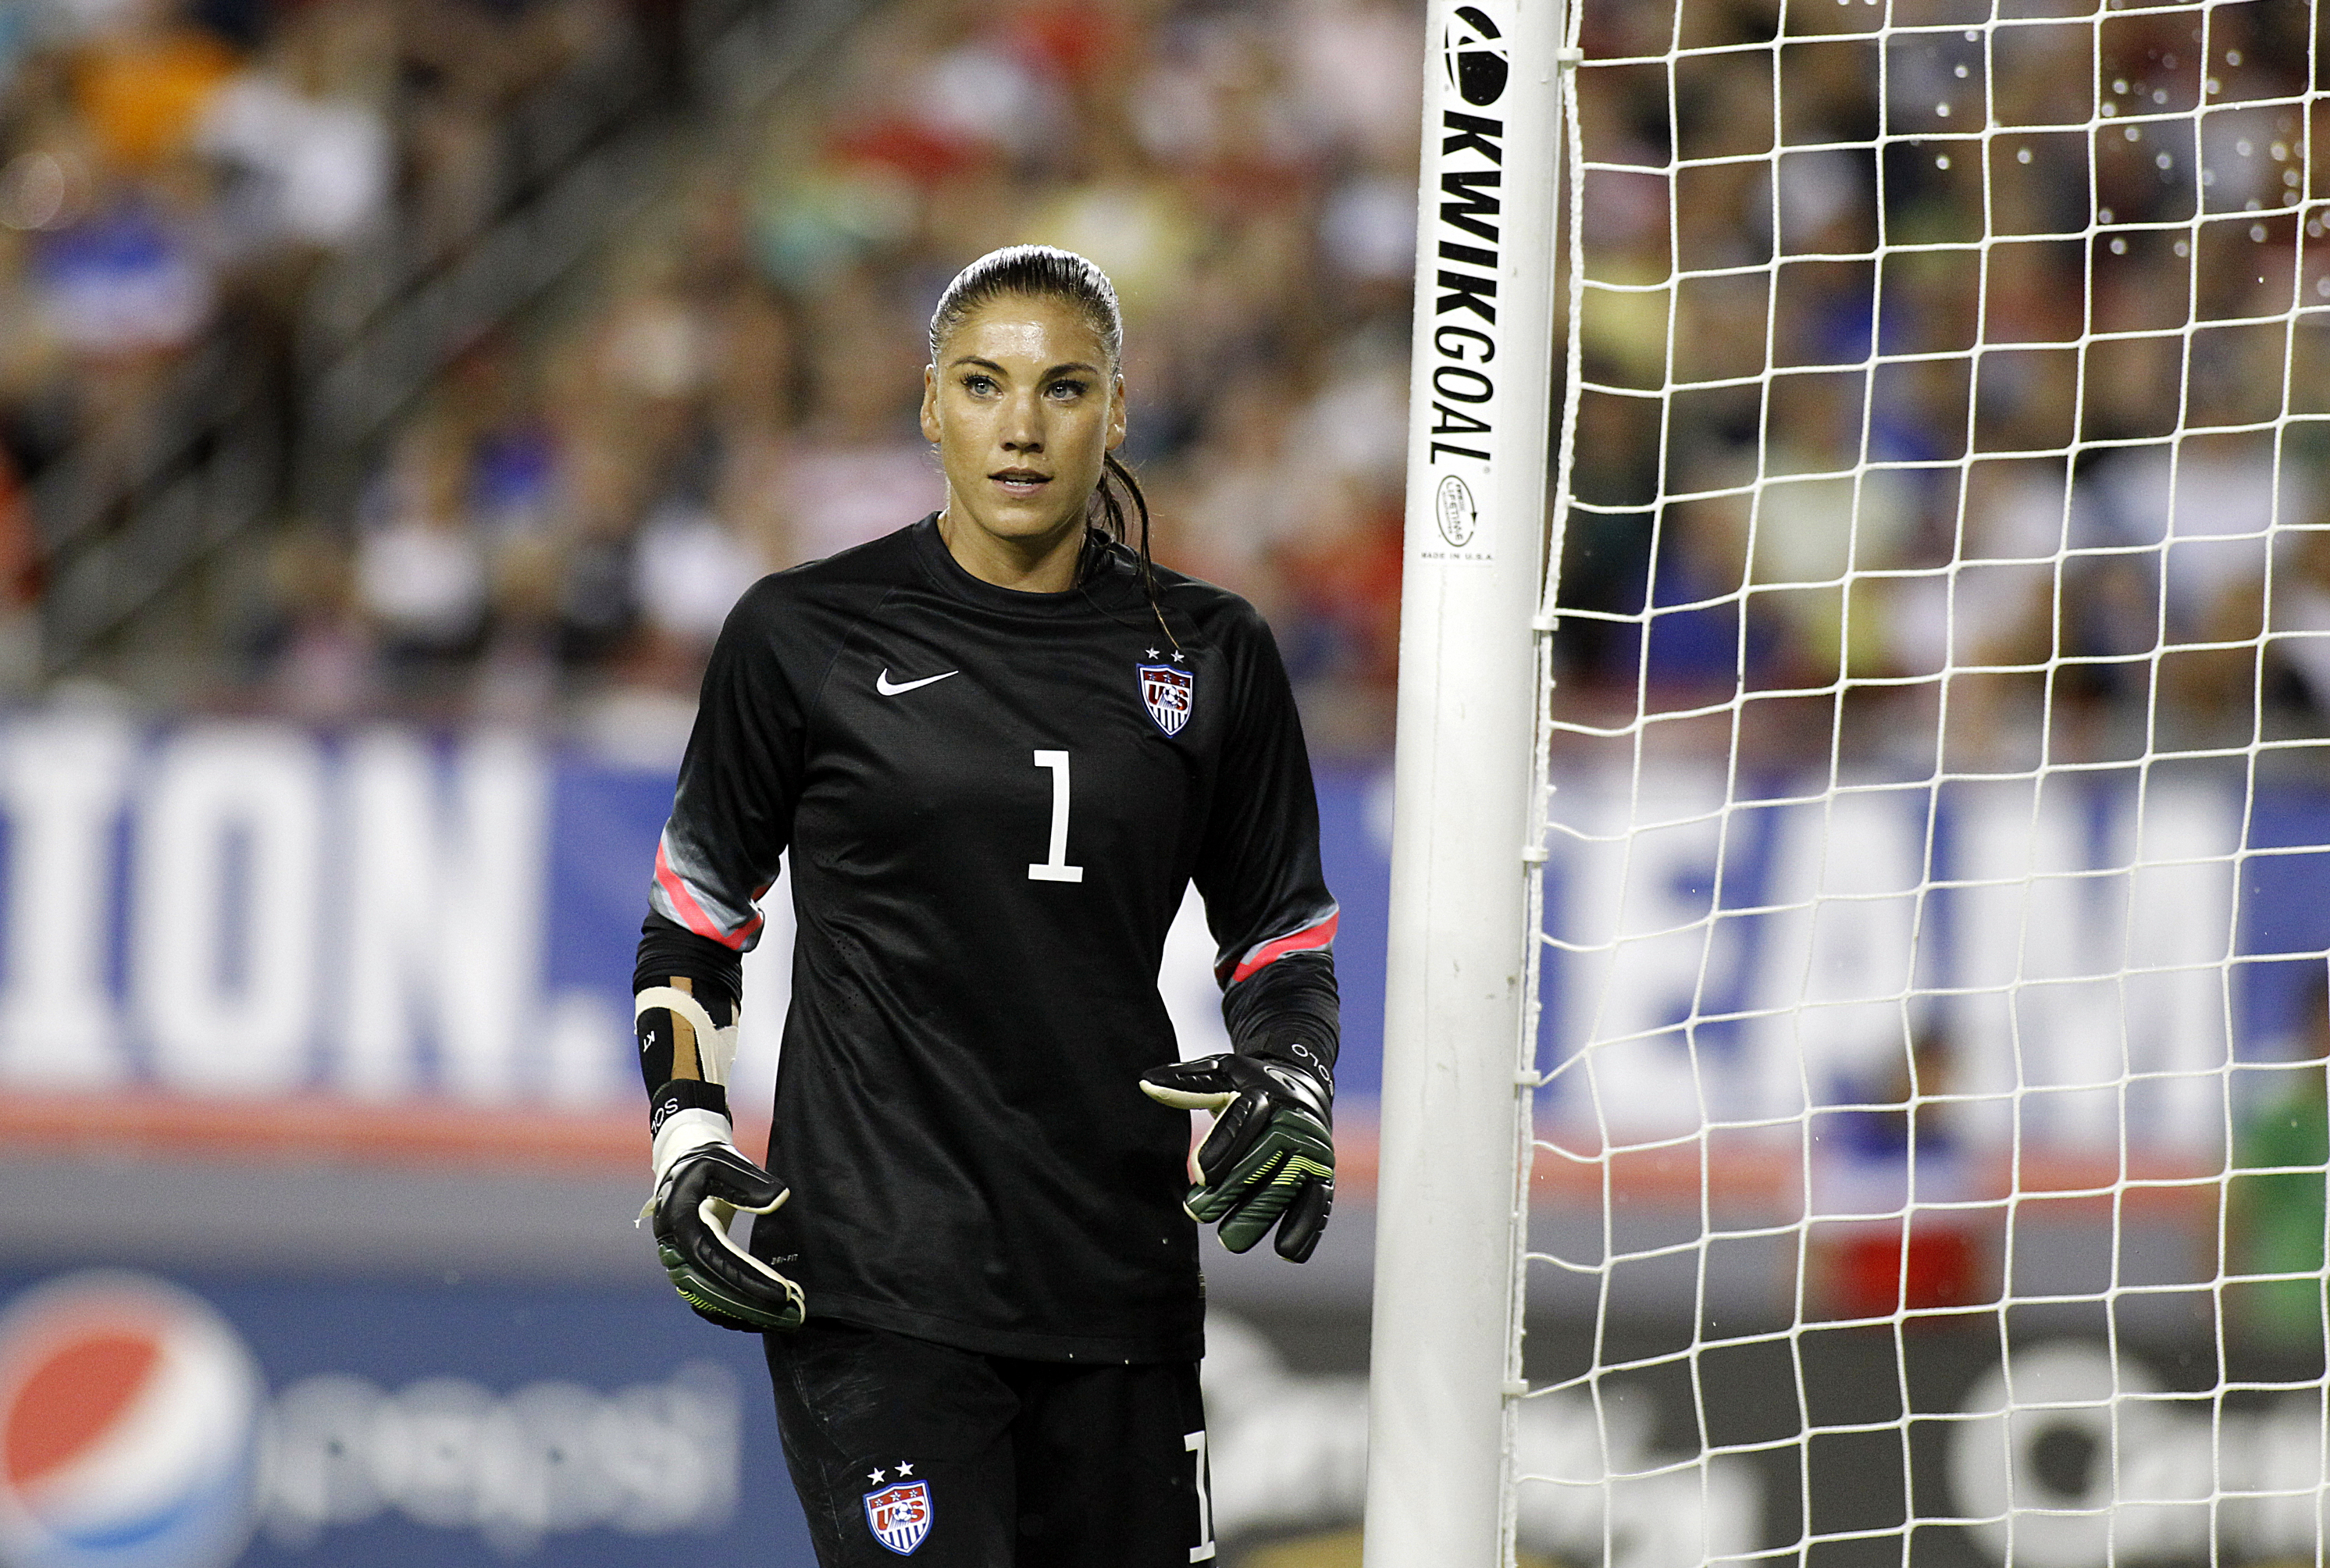 Goalkeeper Hope Solo takes her position in goal during the second half of a women's friendly soccer match against France on June 14, 2014 at Raymond James Stadium in Tampa, Florida. (Brian Blanco&amp;mdash;Getty Images)